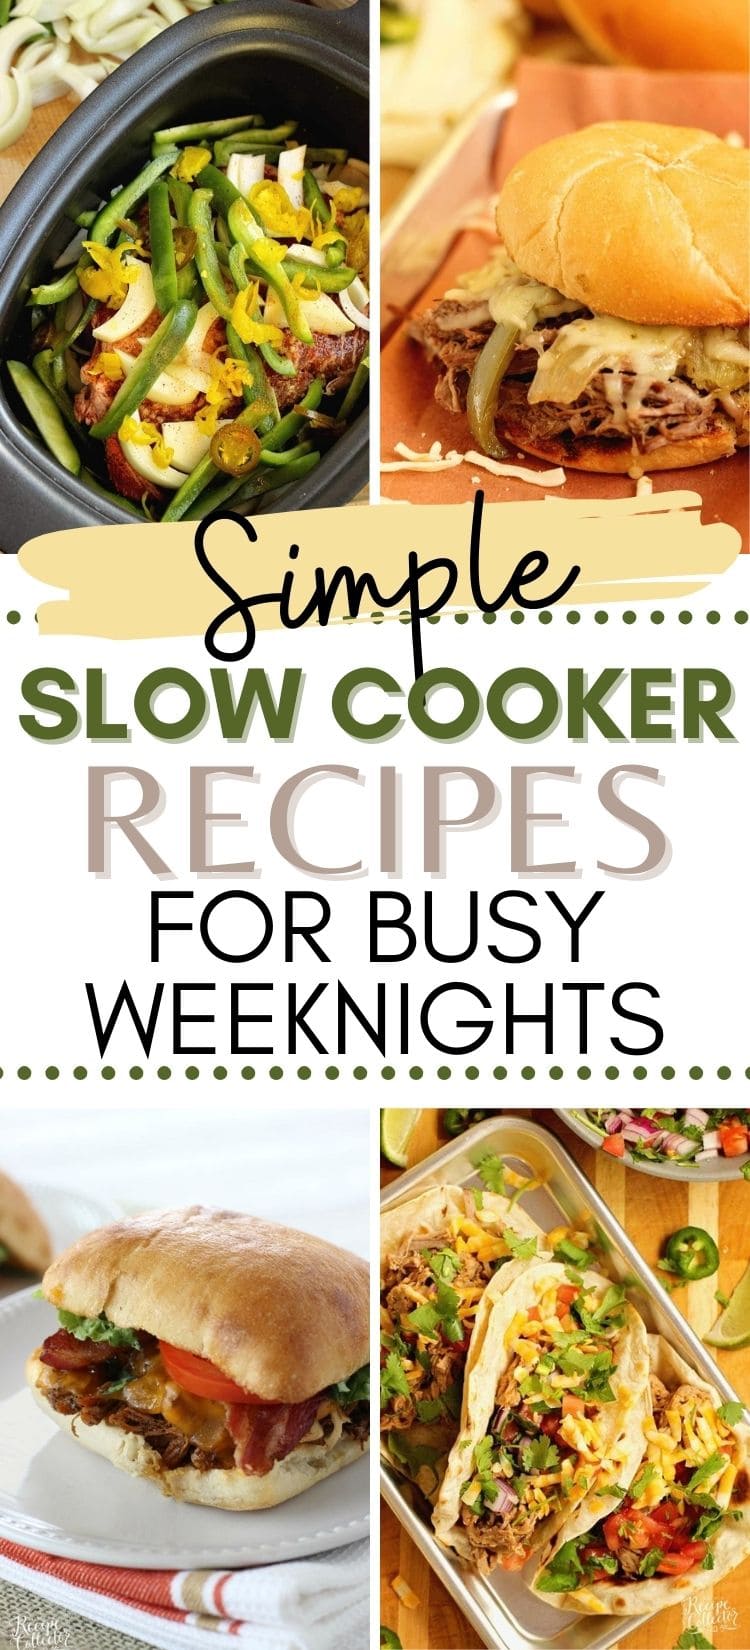 5 slow cookers to help make quick-and-cozy weeknight dinners